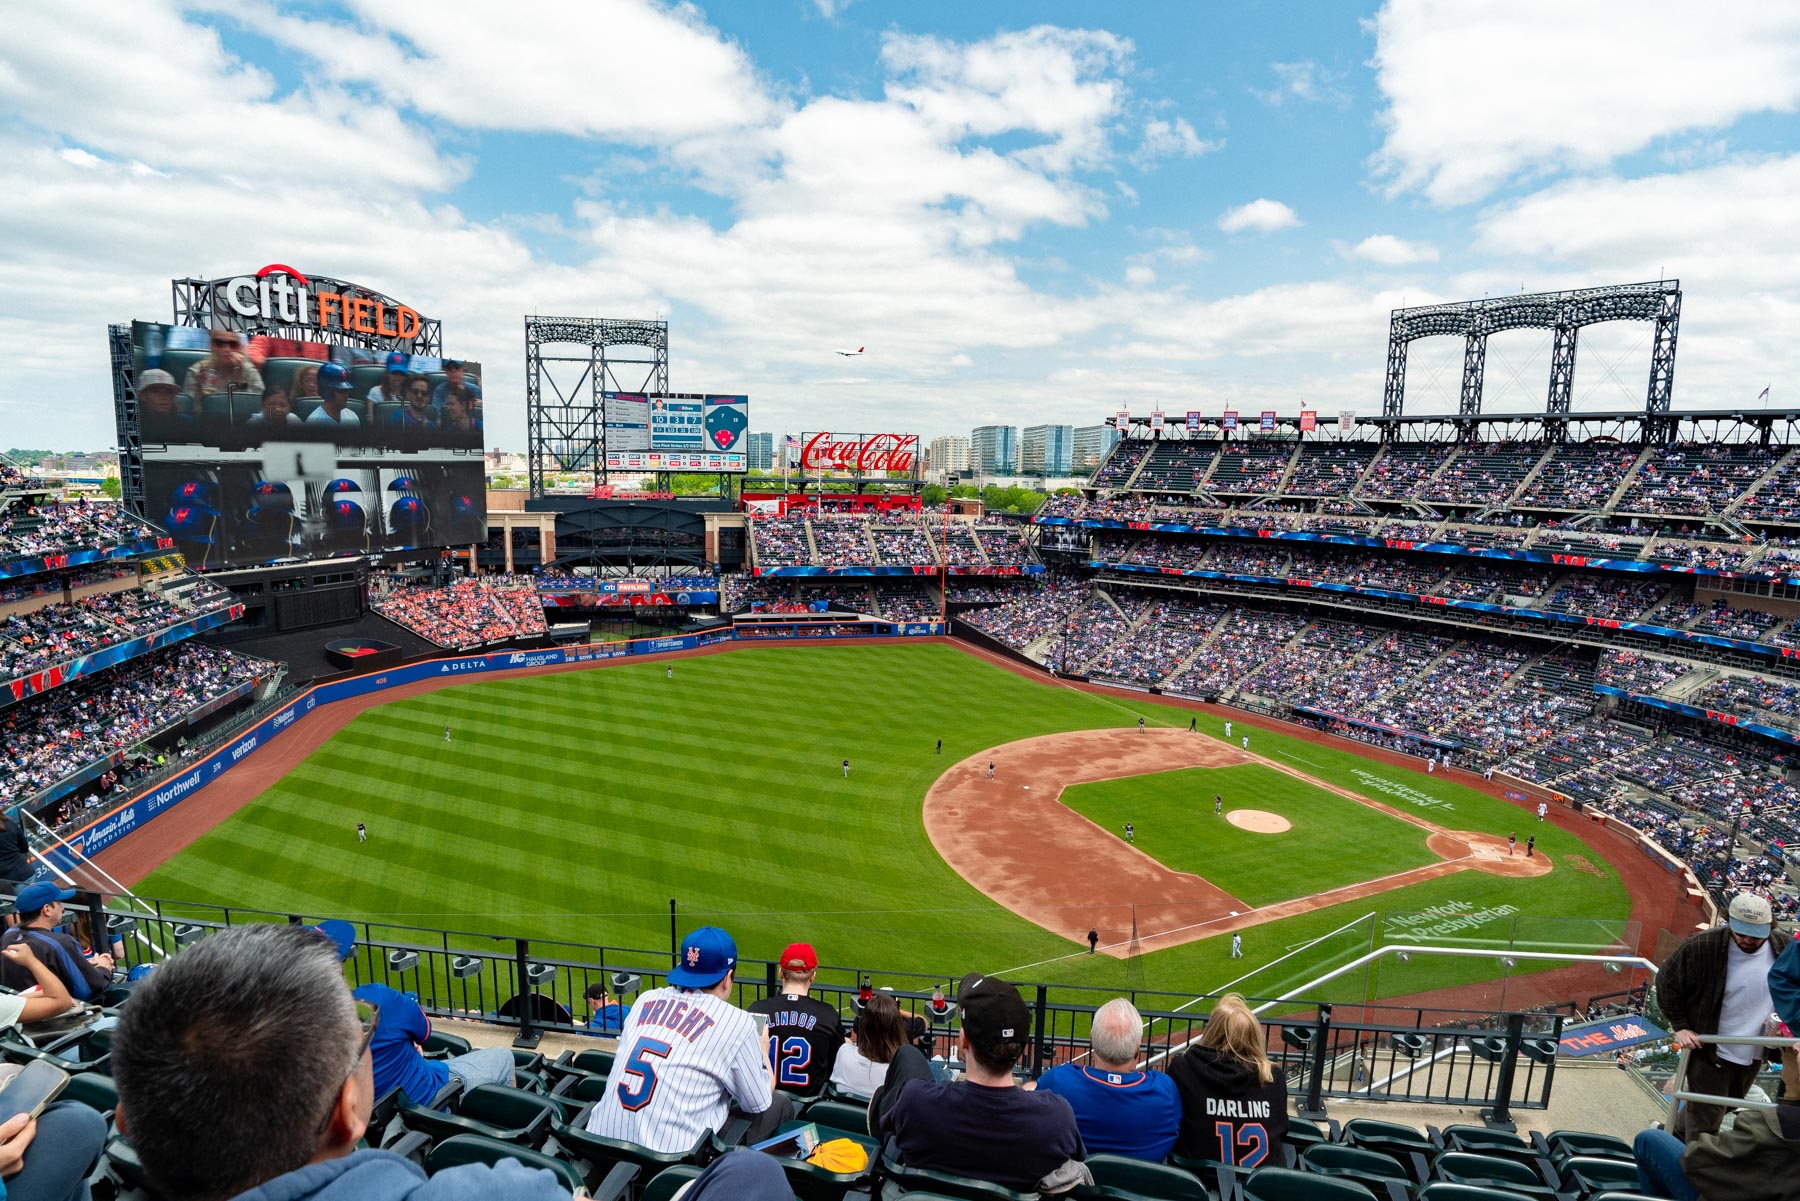 The Mets Stadium NYC, things to do in NYC with teens